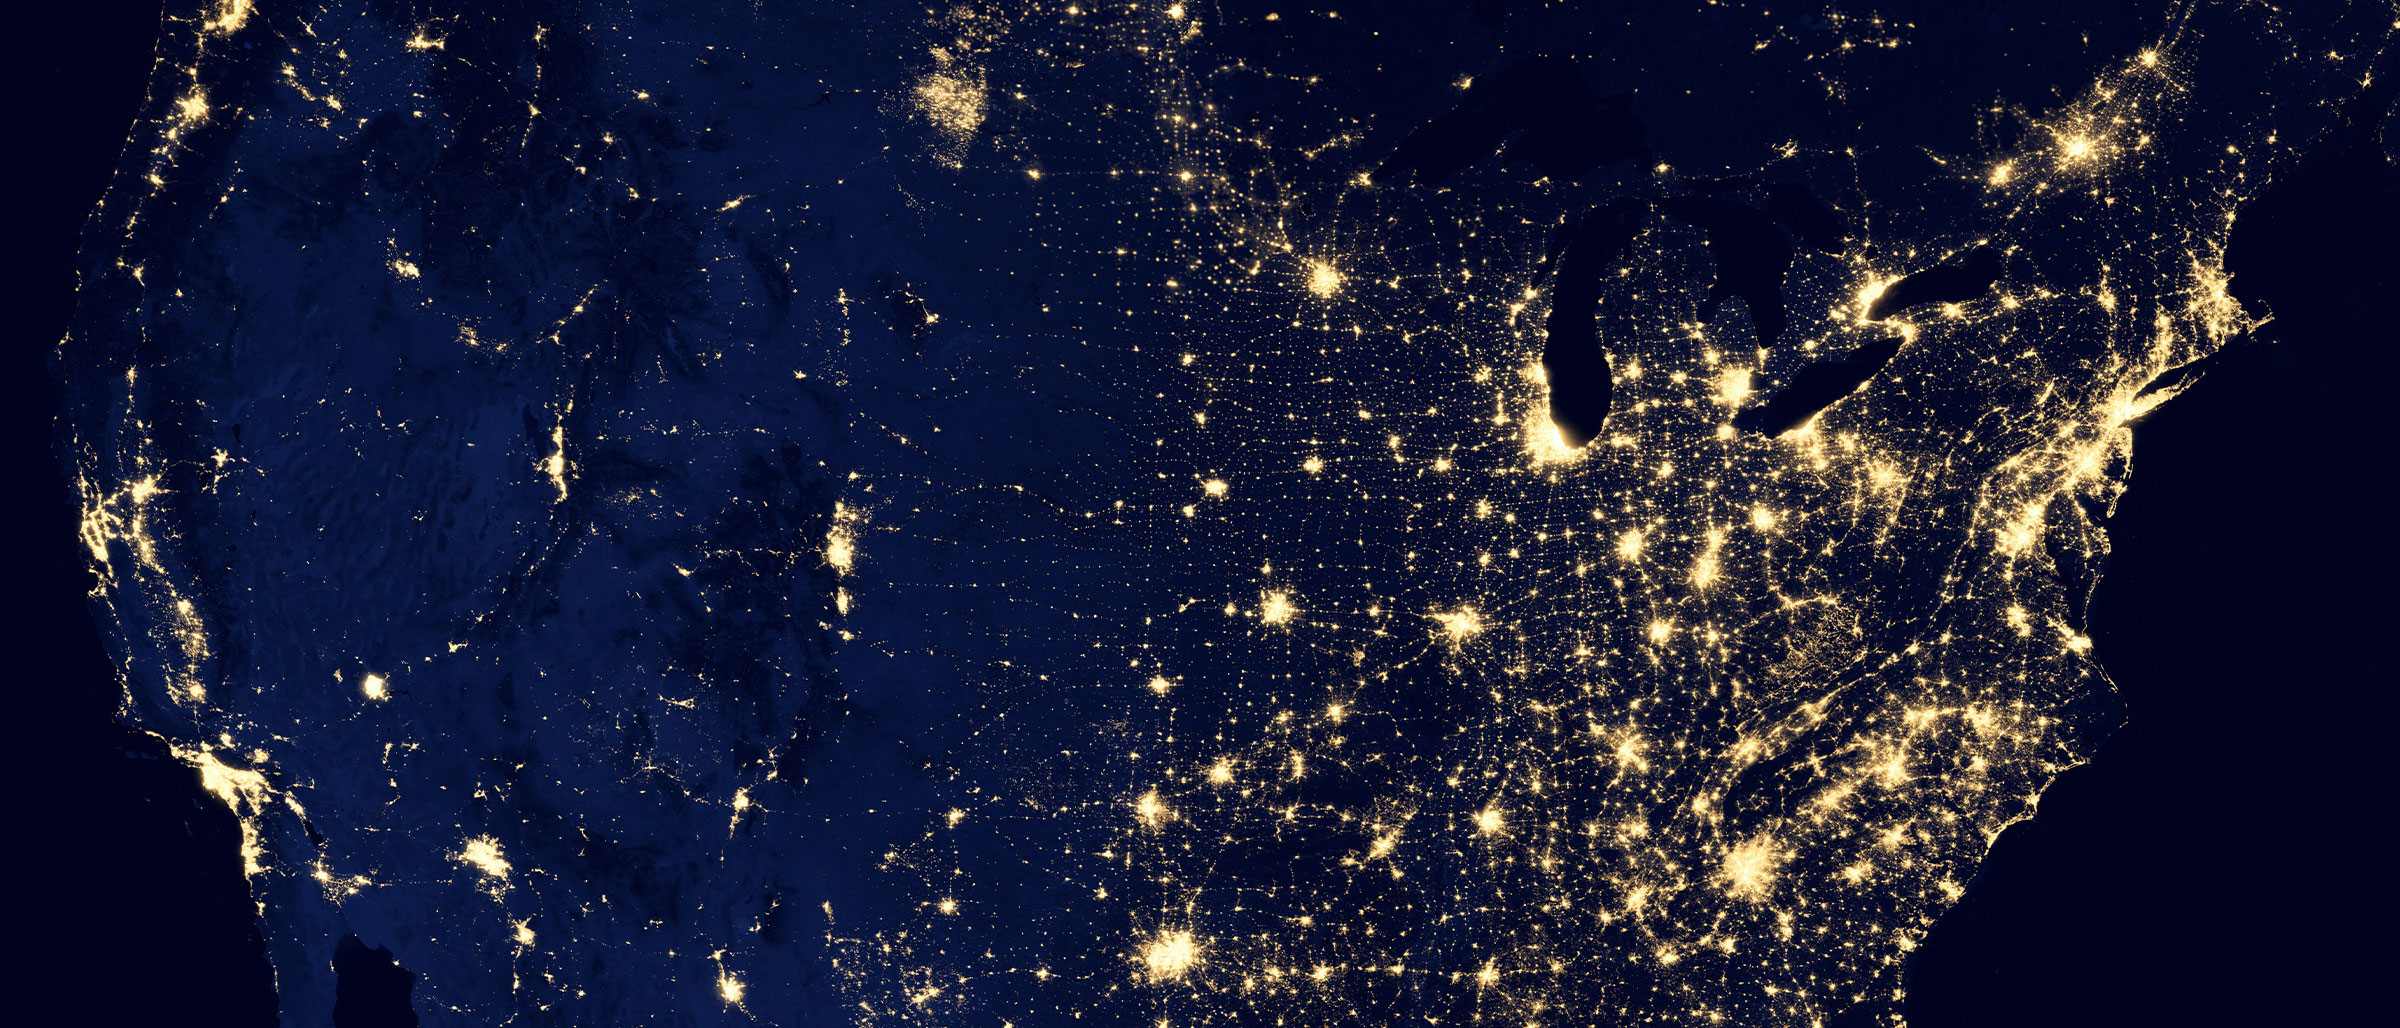 Map of USA with lights on major cities